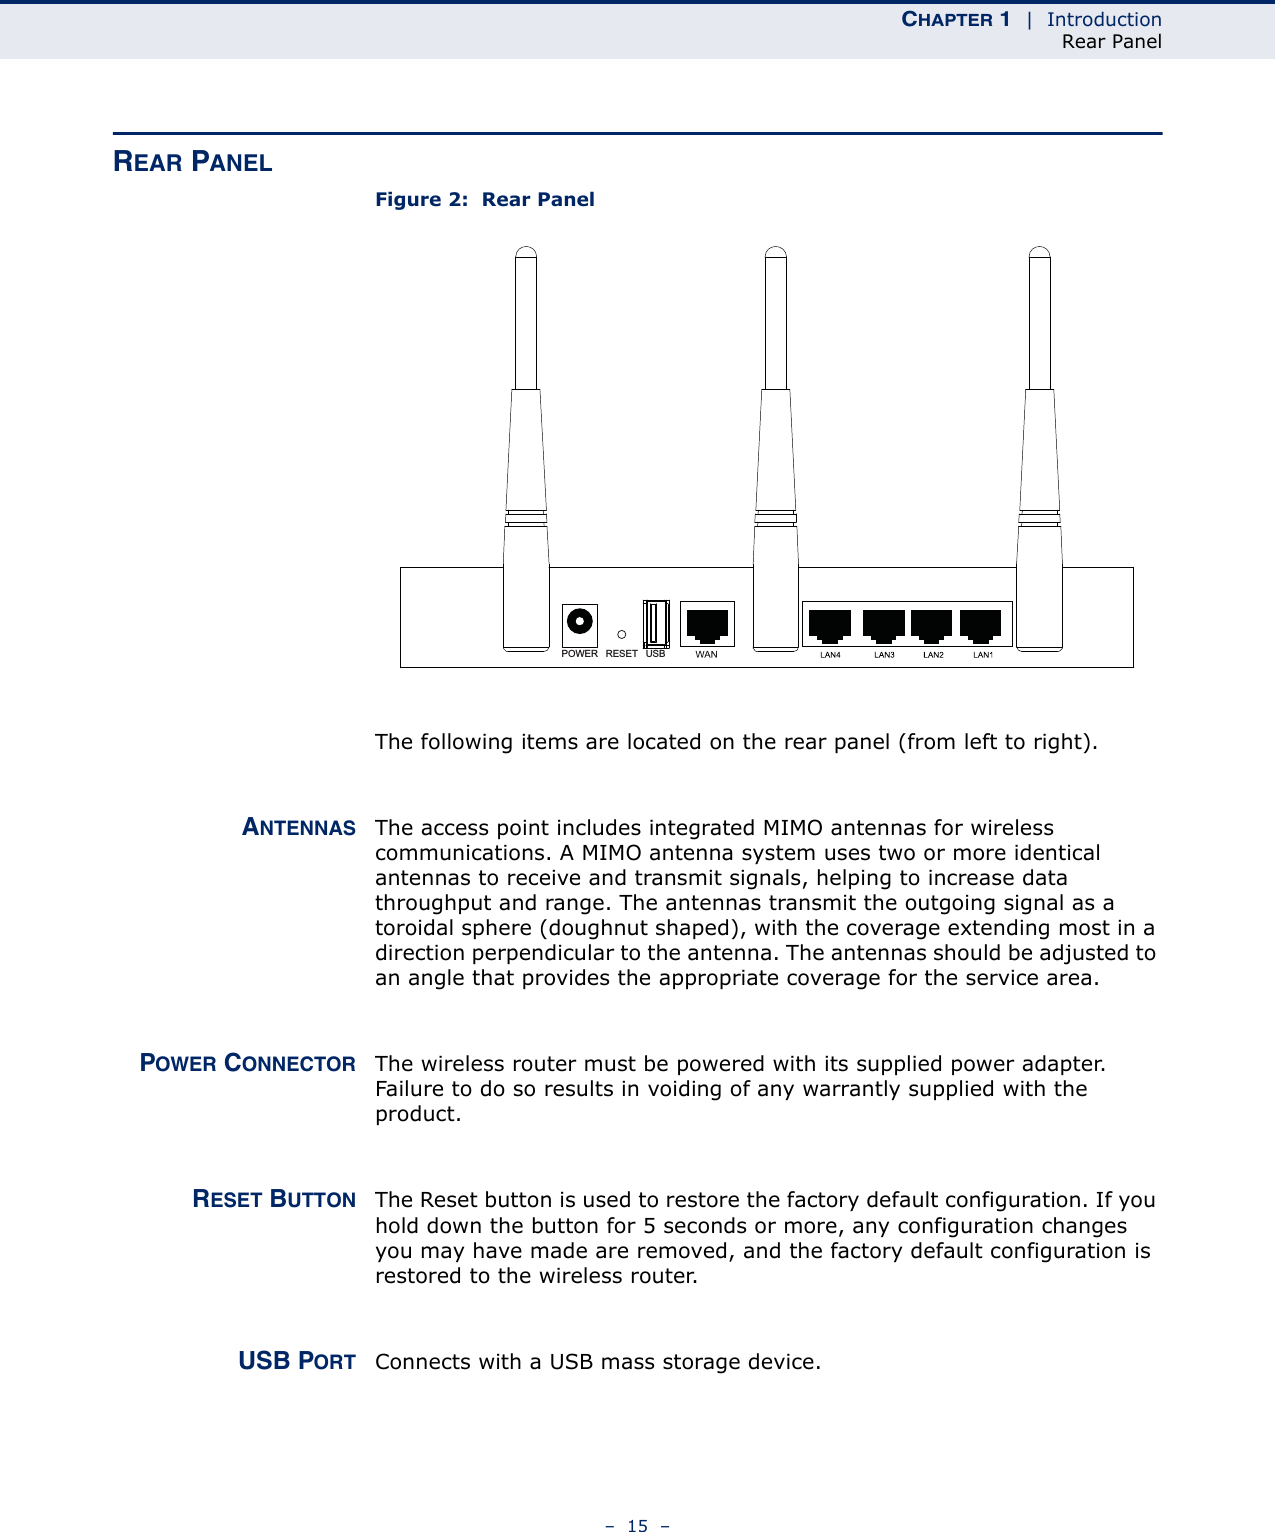 CHAPTER 1  |  IntroductionRear Panel–  15  –REAR PANELFigure 2:  Rear PanelThe following items are located on the rear panel (from left to right).ANTENNAS The access point includes integrated MIMO antennas for wireless communications. A MIMO antenna system uses two or more identical antennas to receive and transmit signals, helping to increase data throughput and range. The antennas transmit the outgoing signal as a toroidal sphere (doughnut shaped), with the coverage extending most in a direction perpendicular to the antenna. The antennas should be adjusted to an angle that provides the appropriate coverage for the service area. POWER CONNECTOR The wireless router must be powered with its supplied power adapter. Failure to do so results in voiding of any warrantly supplied with the product.  RESET BUTTON The Reset button is used to restore the factory default configuration. If you hold down the button for 5 seconds or more, any configuration changes you may have made are removed, and the factory default configuration is restored to the wireless router. USB PORT Connects with a USB mass storage device.POWER RESET USB